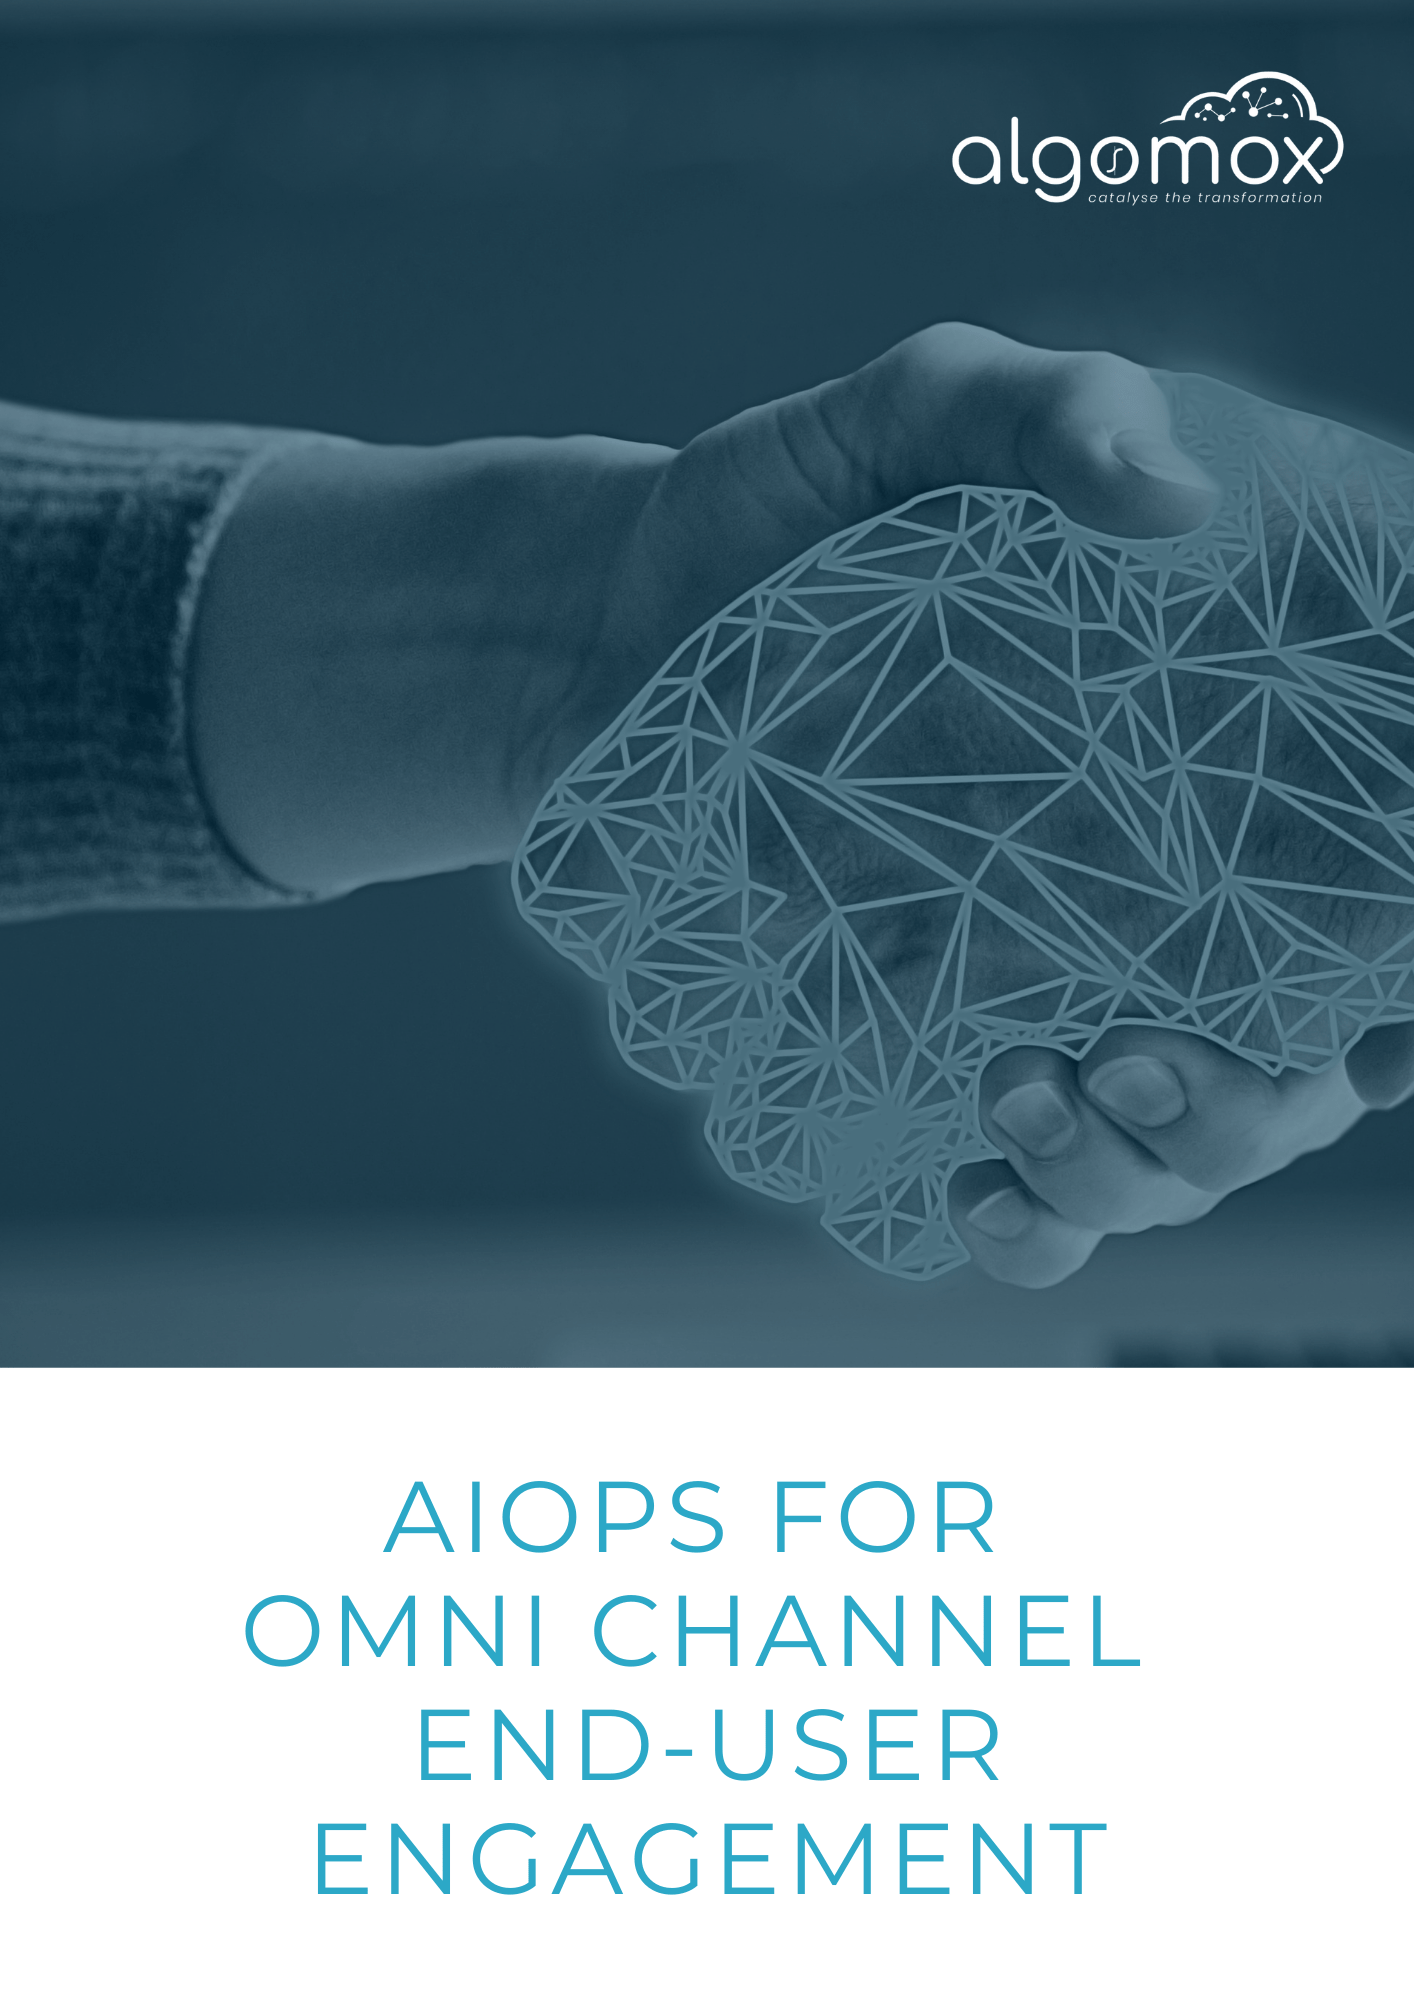 Infinite Possibilities: AIOps for Omni Channel End User Engagement